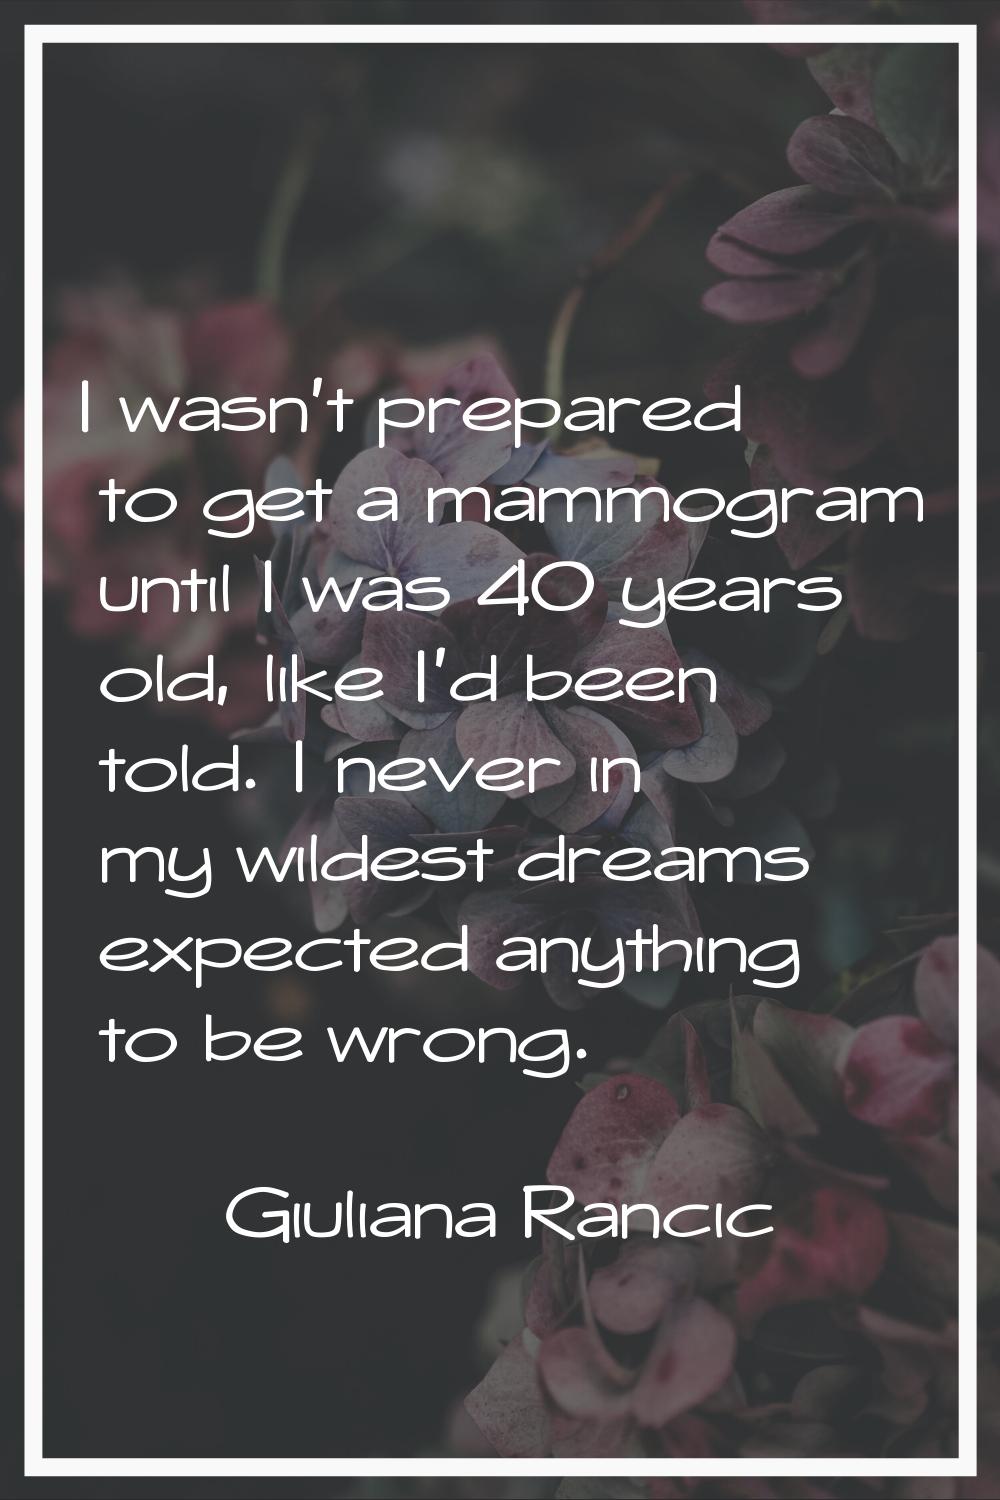 I wasn't prepared to get a mammogram until I was 40 years old, like I'd been told. I never in my wi